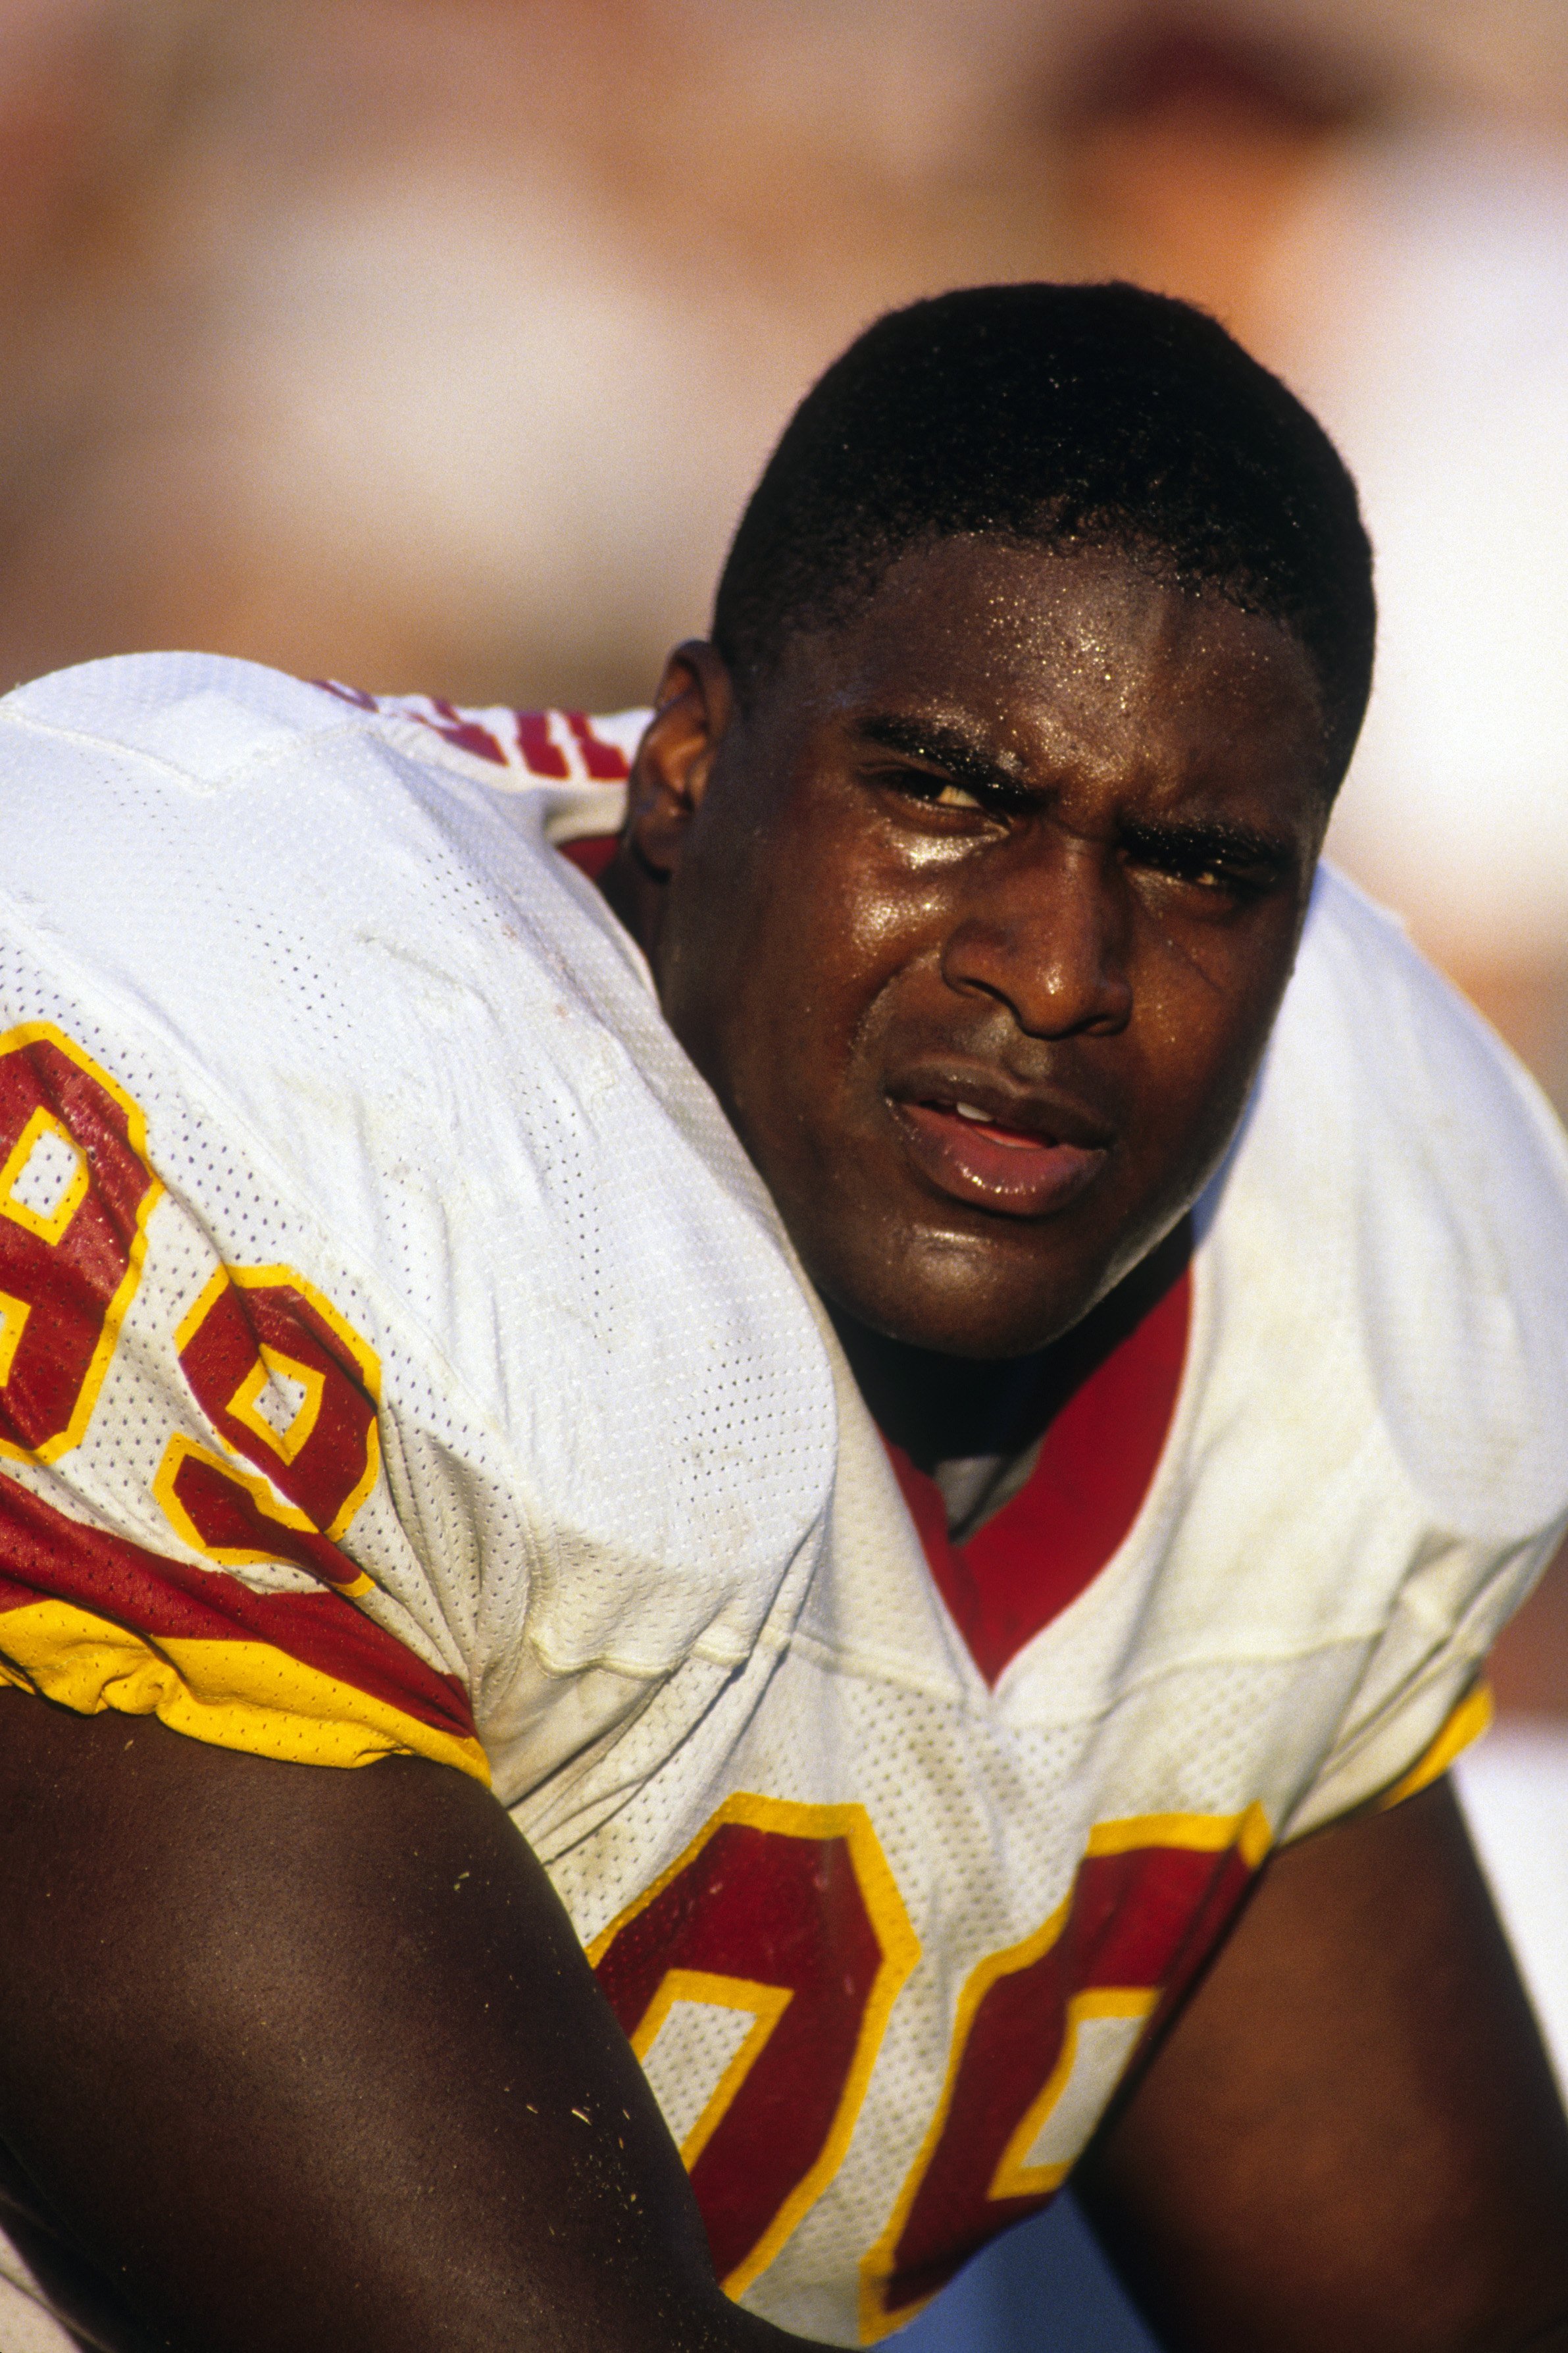 Defensive tackle Tracy Rocker #99 of the Washington Redskins during the game against the Los Angeles Raiders at RFK Stadium on October 29, 1989 in Washington, D.C. | Source: Getty Images